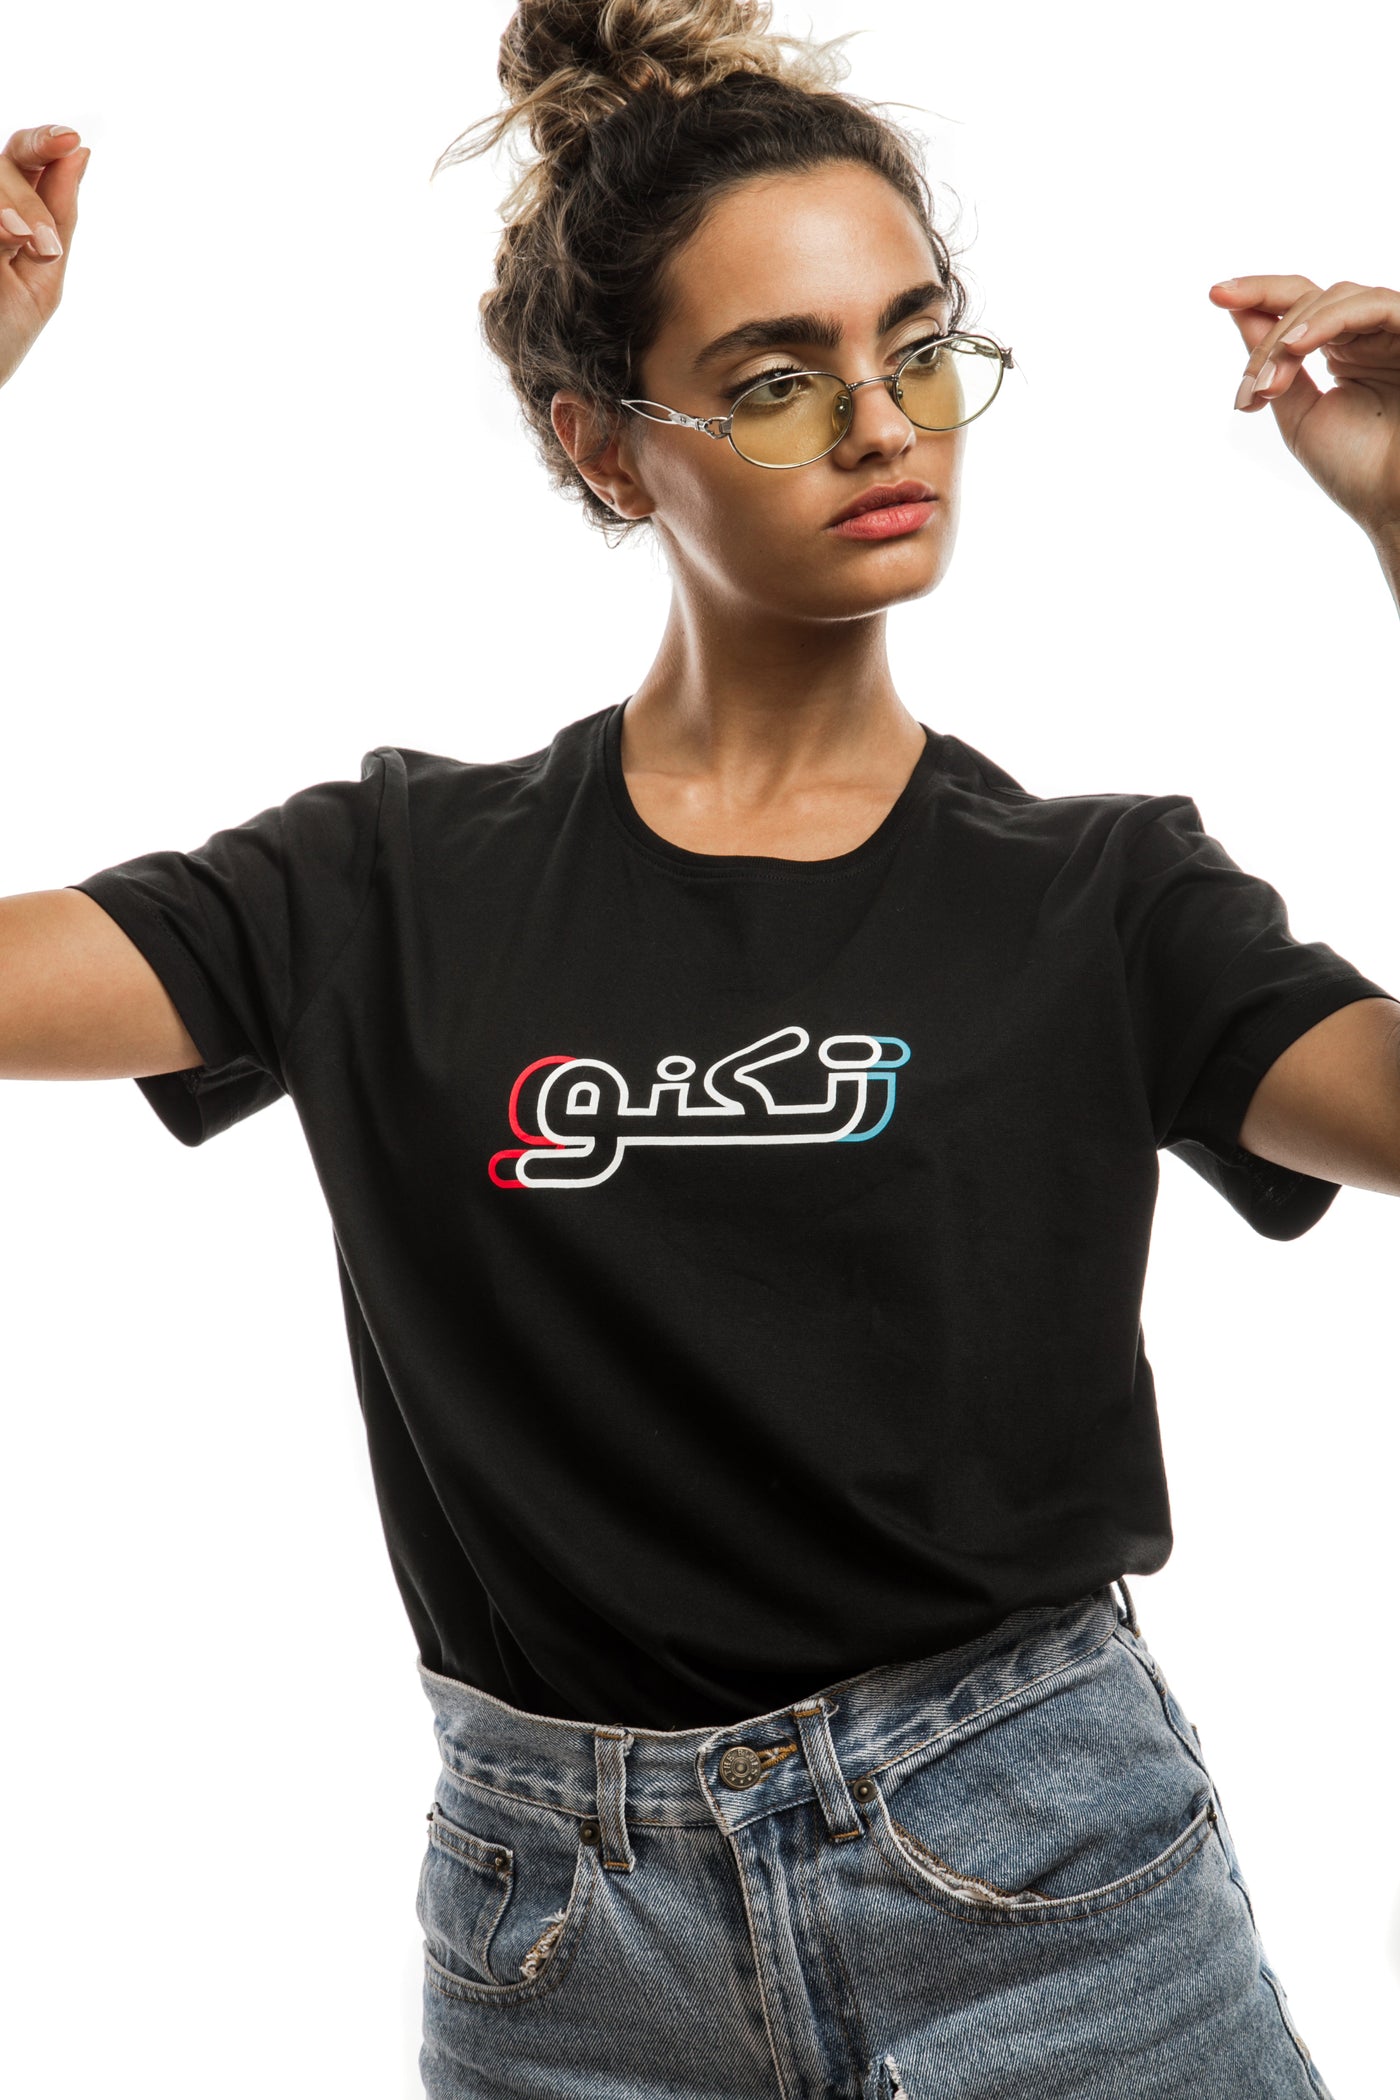 young adult female wearing black t-shirt with techno written in arabic تكنو and in blue, red and white in the center of the t-shirt along with blue jeans shorts and glasses